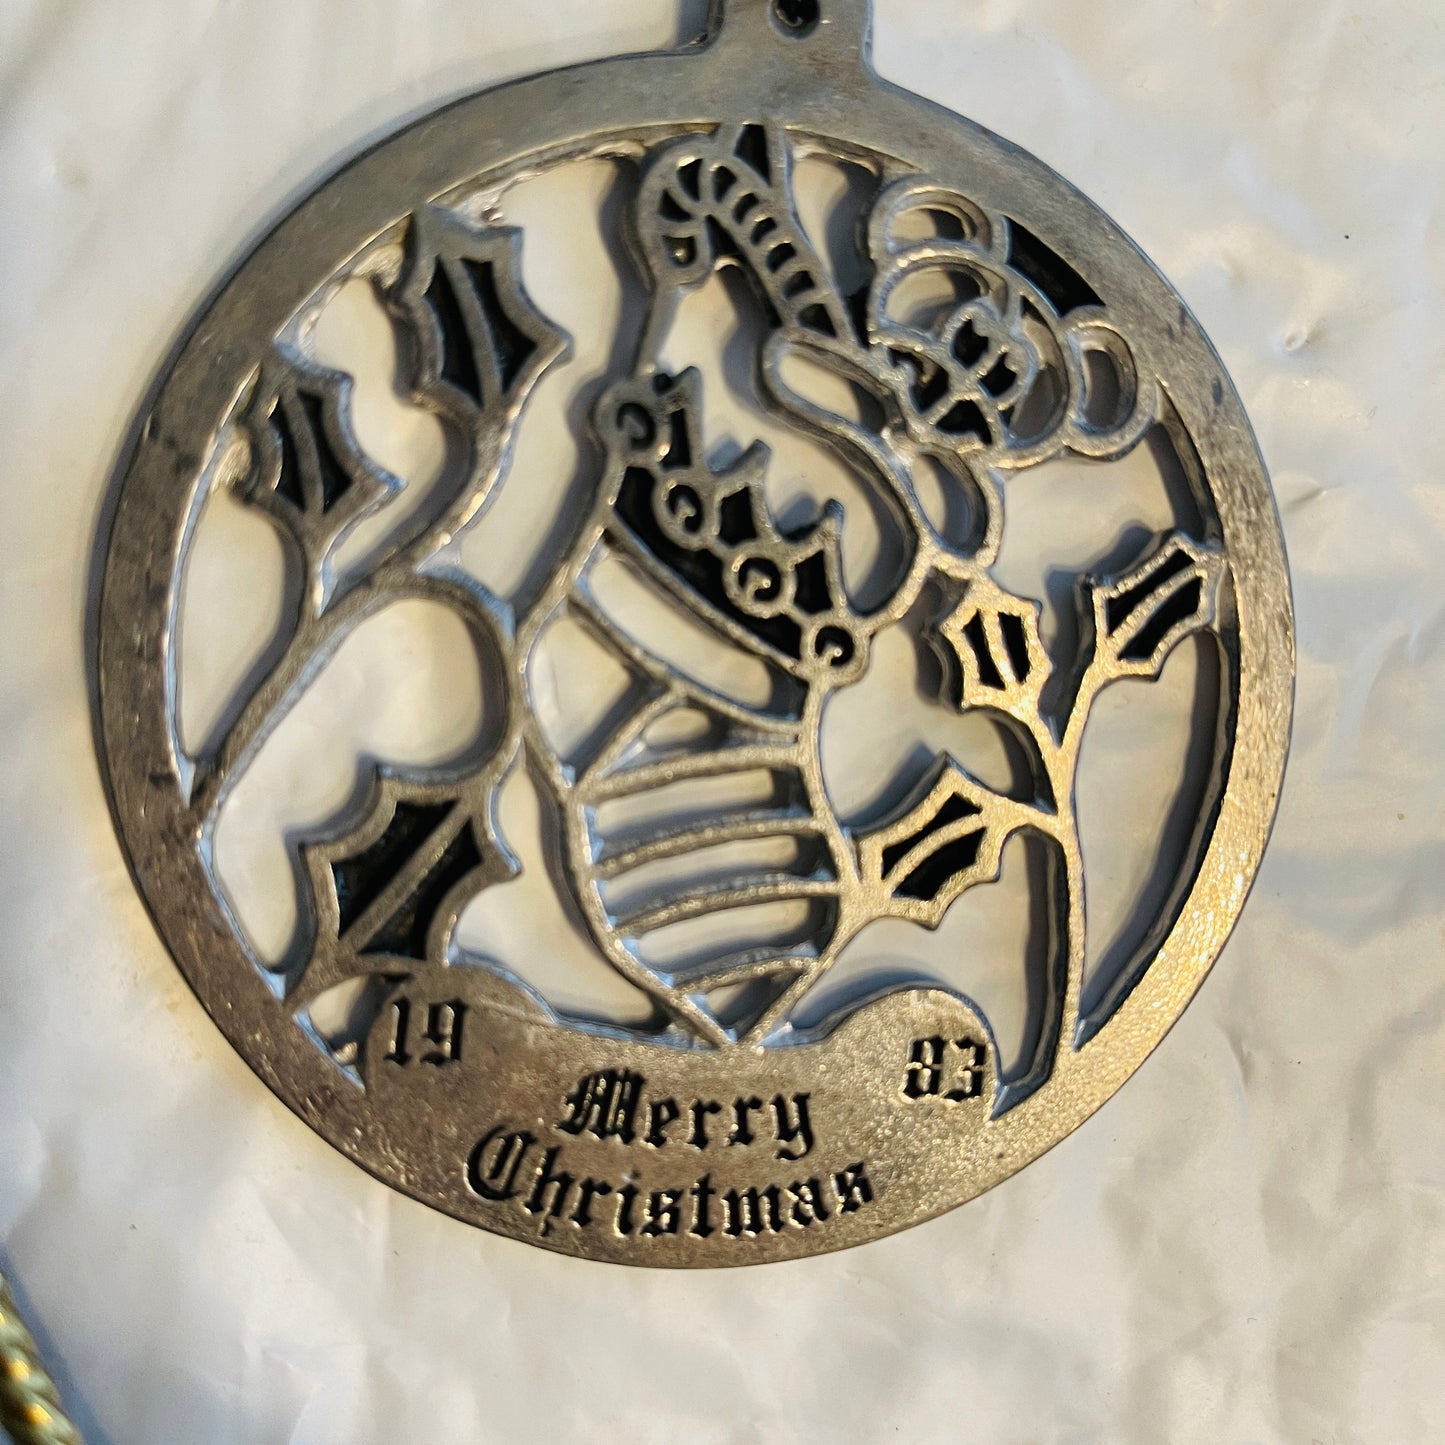 Pewter, Remember the Children, Merry Christmas, Dated 1983, Ornament